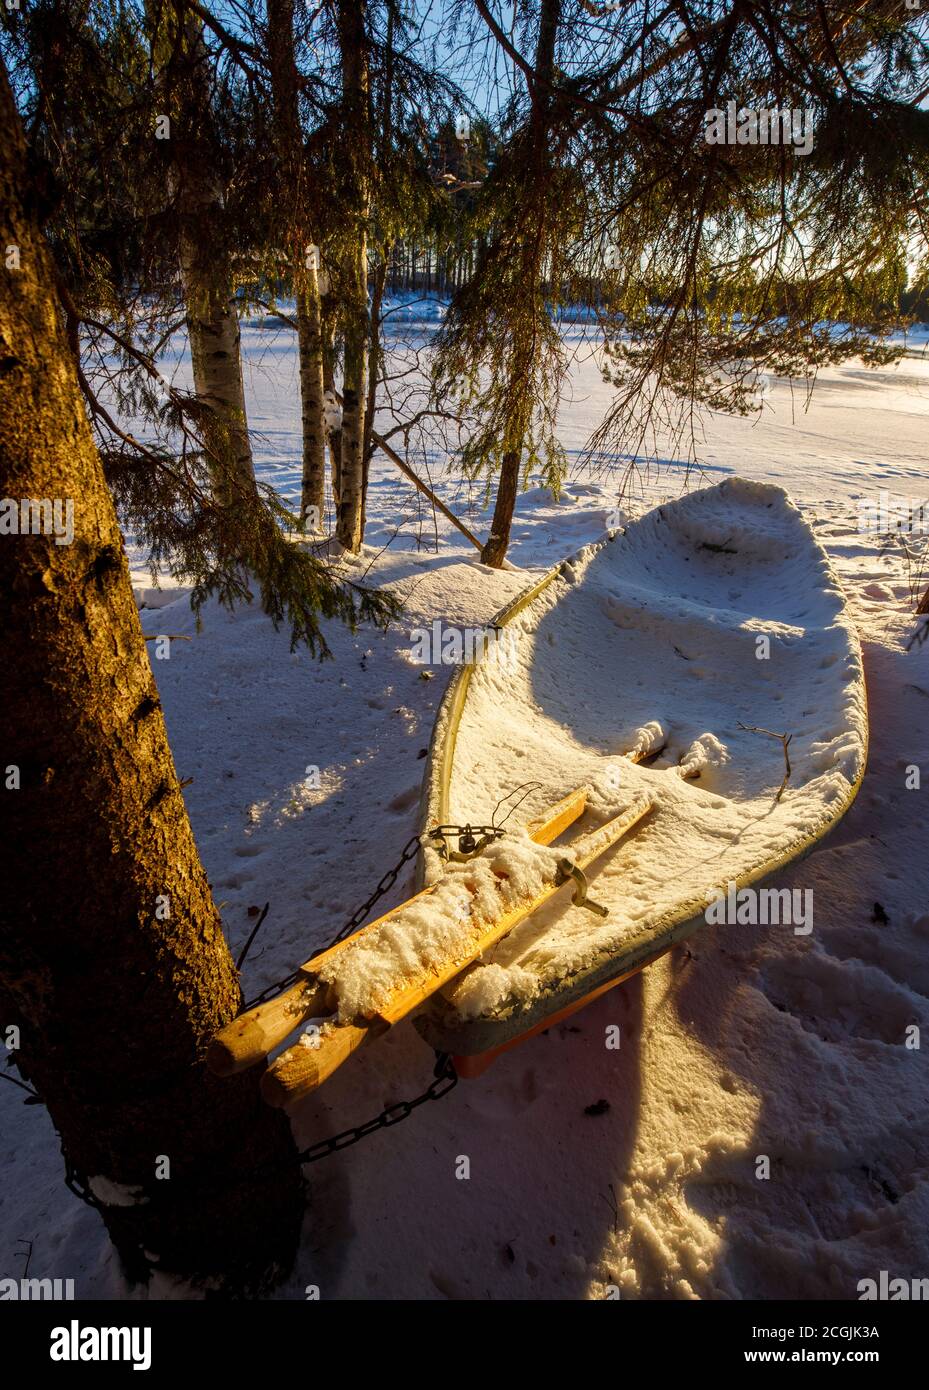 Pair of wooden oars and a rowboat / skiff full of snow and ice at Winter , Finland Stock Photo